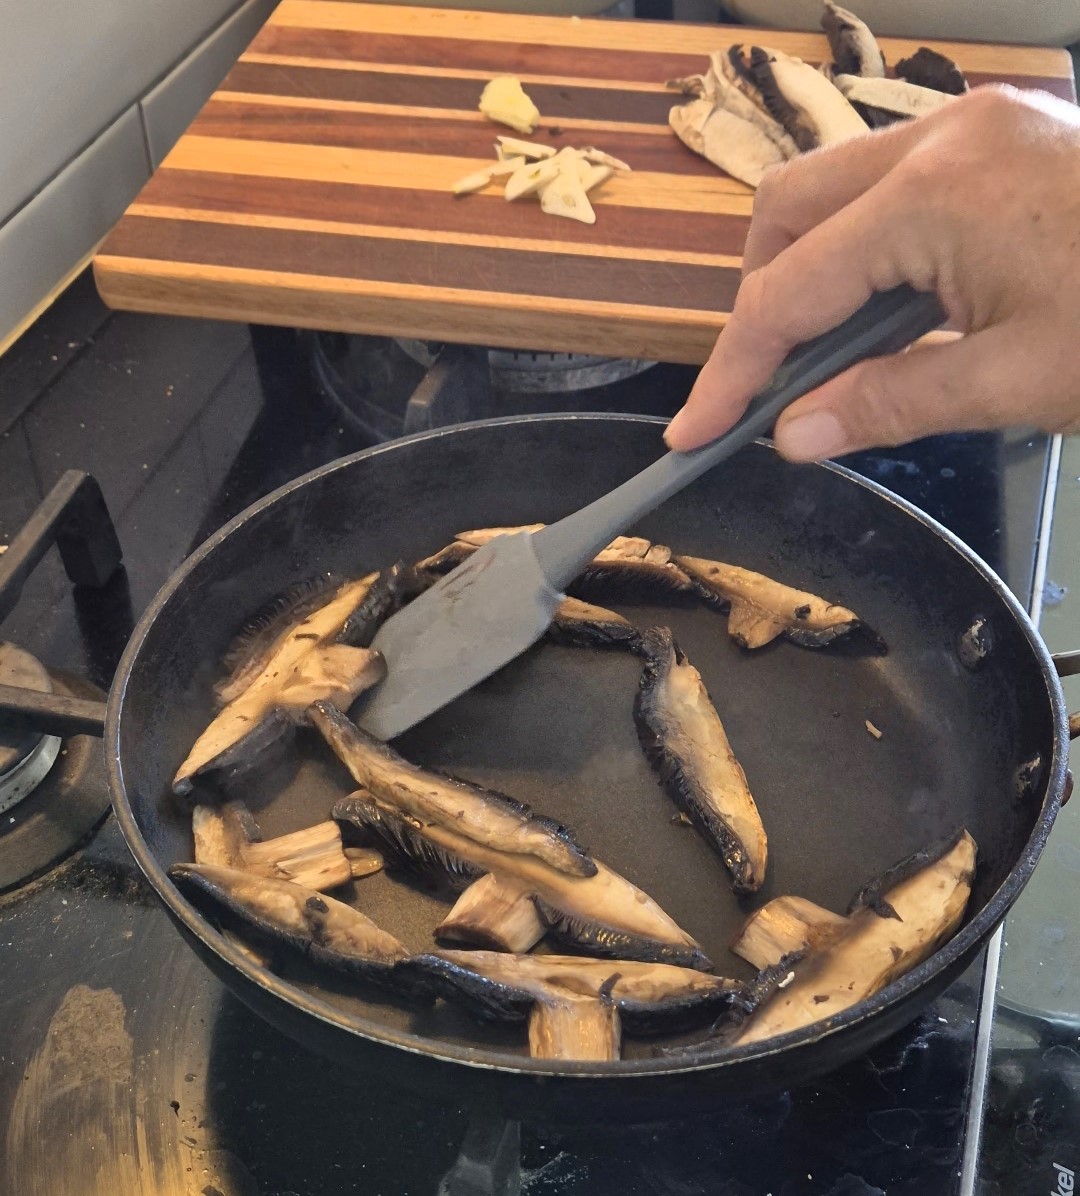 A frying pan on a stove with sliced mushrooms in it. A hand holding a spatula is moving the mushrooms around the pan. There is a wooden chopping board resting on the stove top